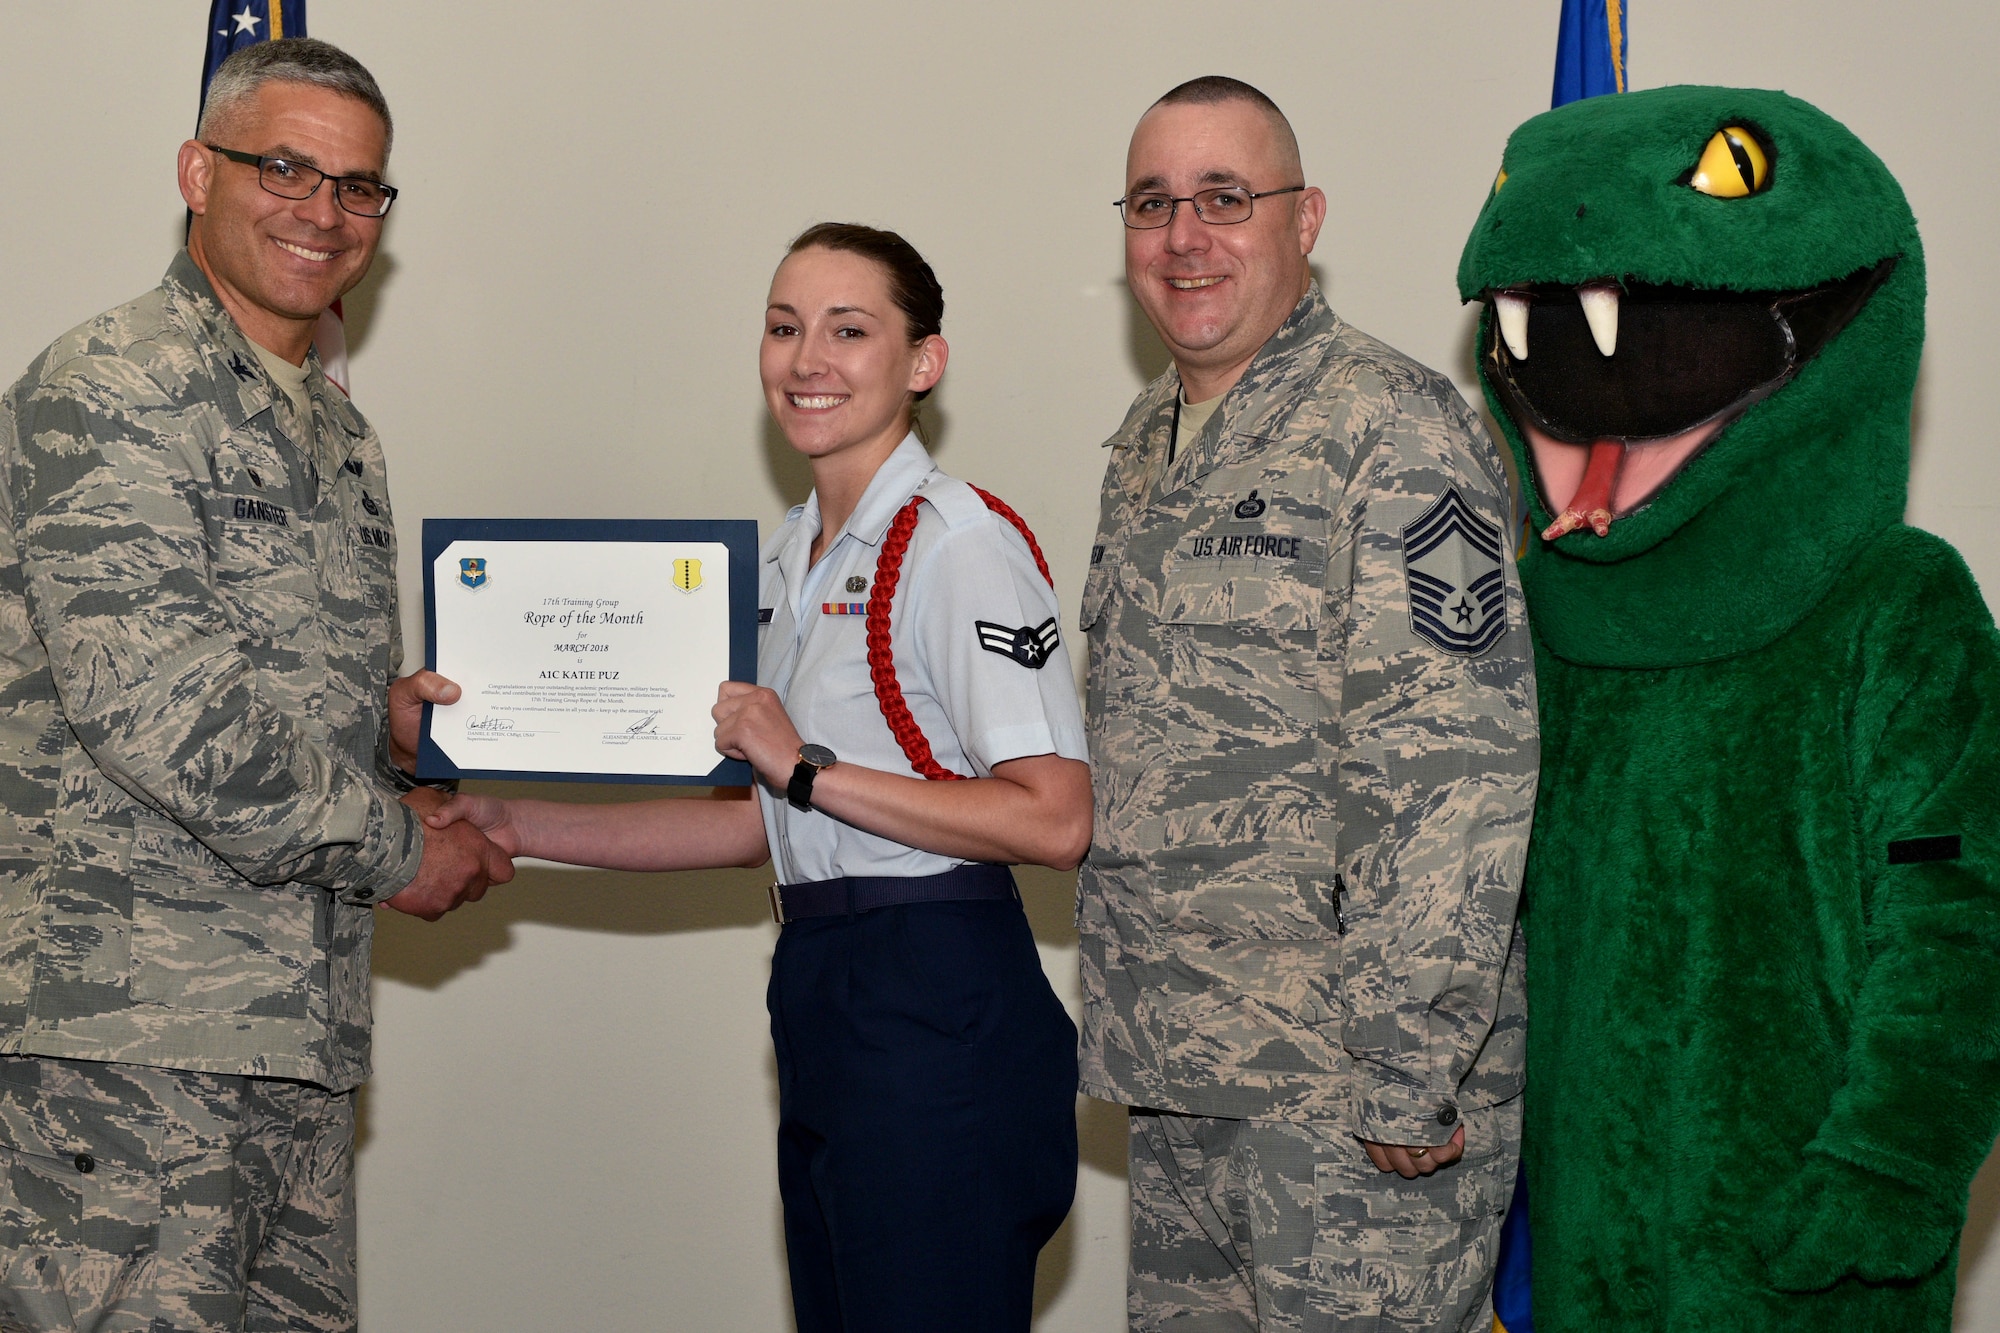 U.S. Air Force Col. Alex Ganster, 17th Training Group commander, and Chief Master Sgt. Daniel Stein, 17th TRG superintendent, present the 17th TRG Rope of the Month certificate to Airman 1st Class Katie Puz, 315th Training Squadron trainee, in the Event Center on Goodfellow Air Force Base, Texas, April 6, 2018. The mission of the 17th TRG is to train, develop and inspire professional fire protection and intelligence, surveillance and reconnaissance warriors. (U.S. Air Force photo by Senior Airman Randall Moose/Released)